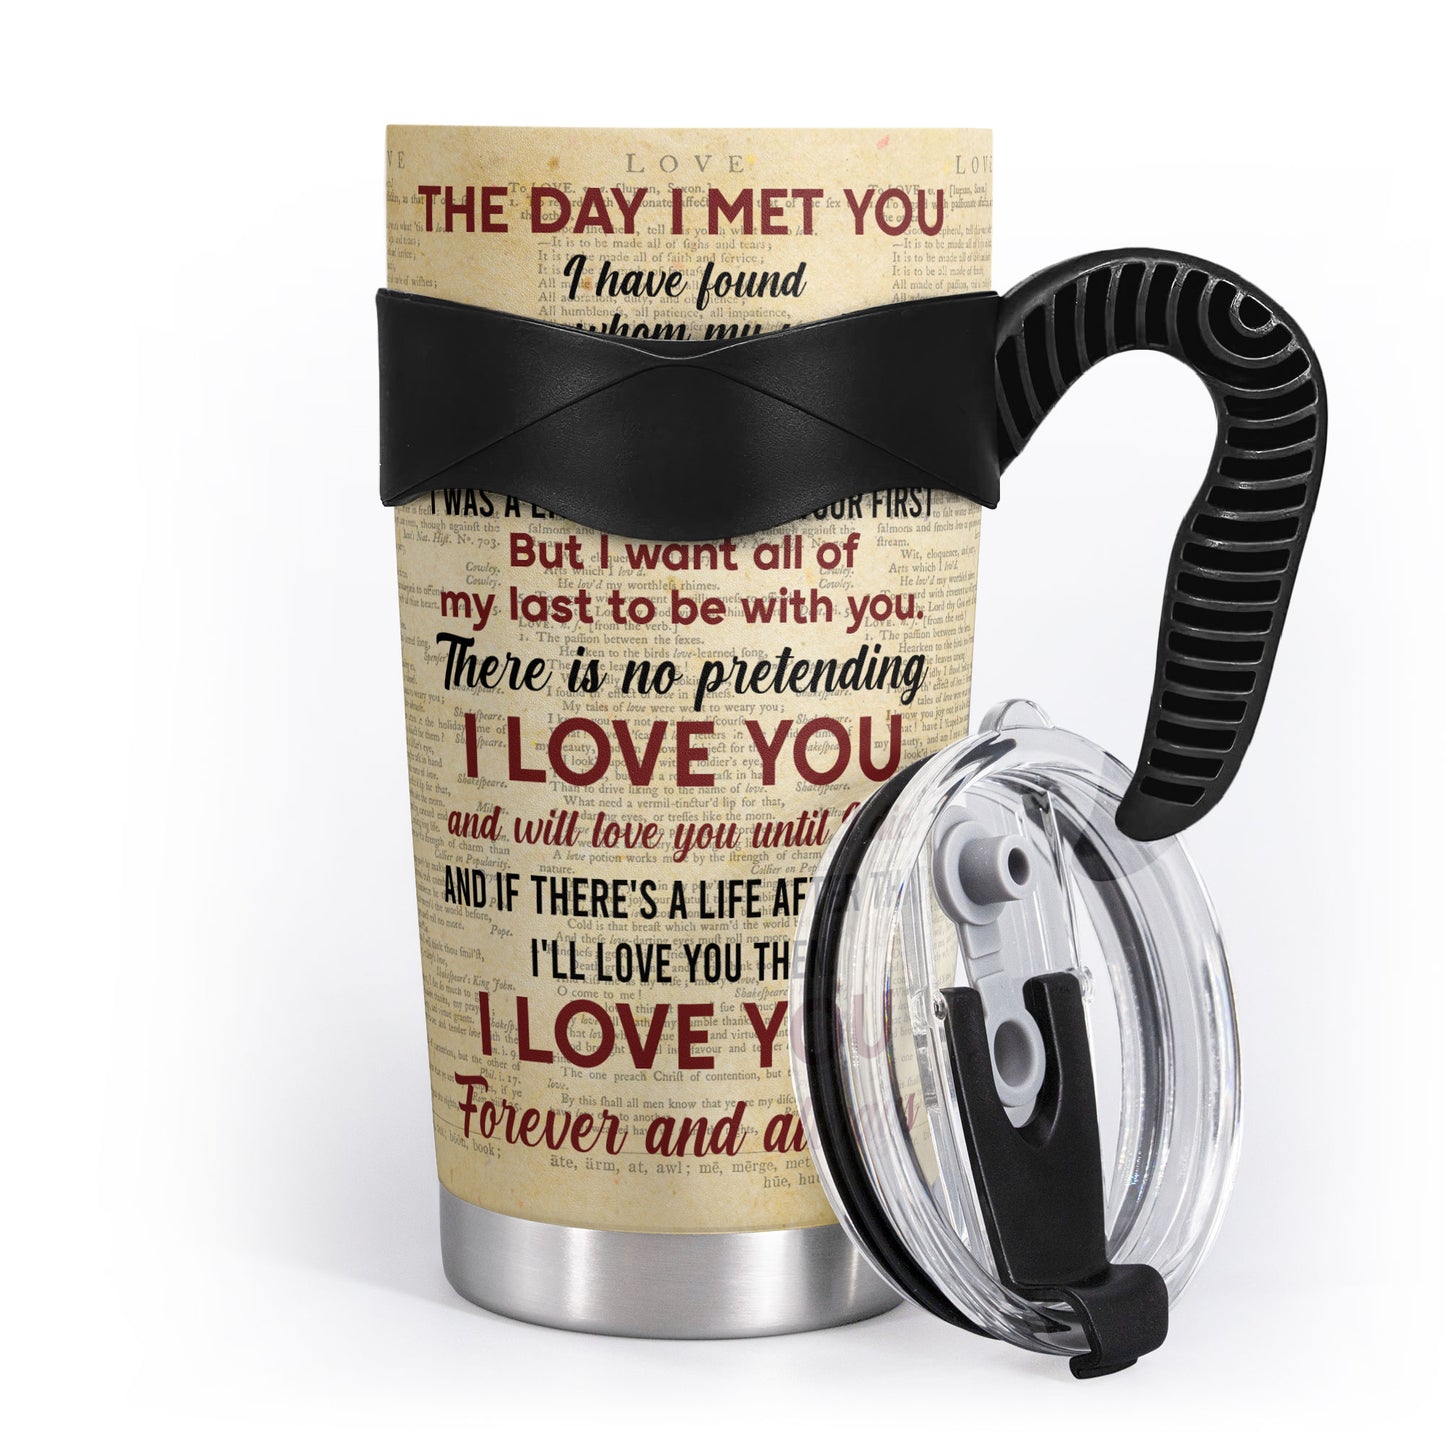 The Day I Met You - Personalized Tumbler Cup - Anniversary Gifts For Her, Him